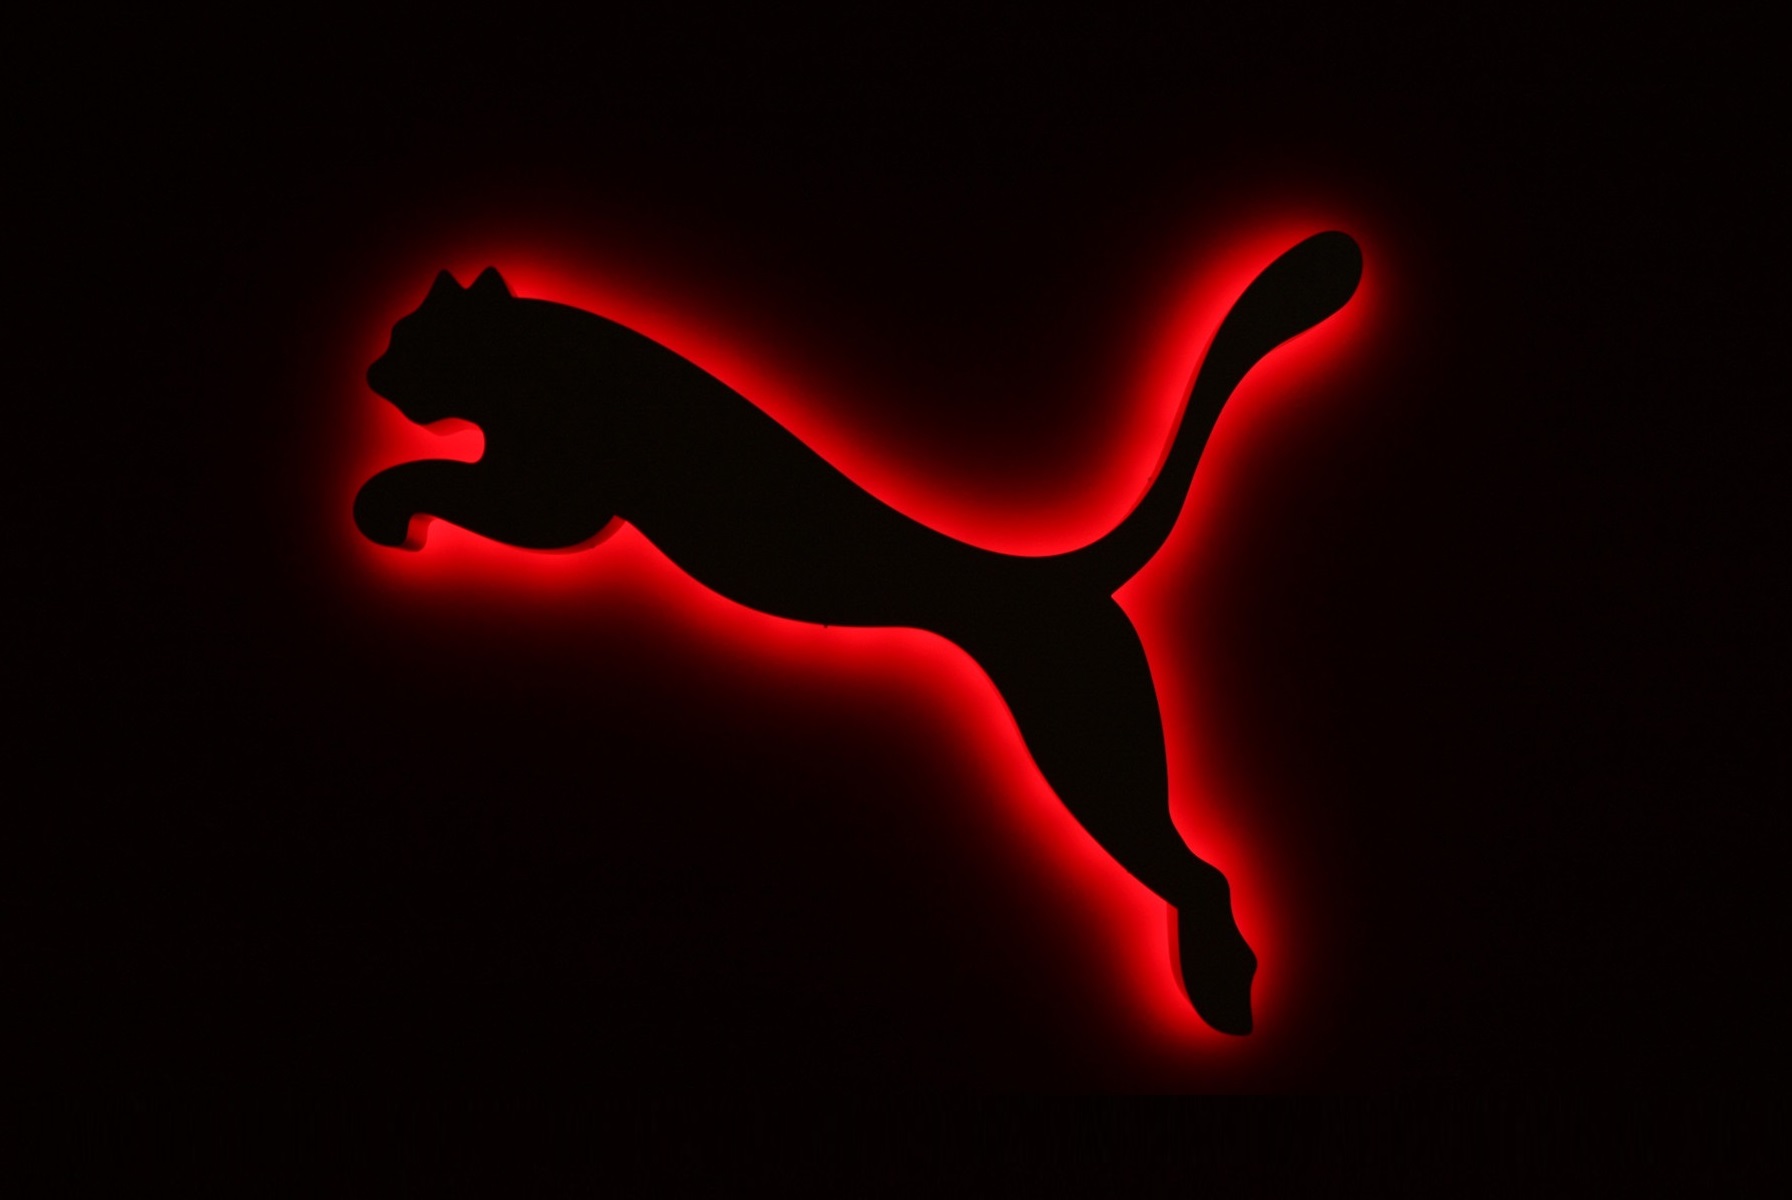 puma triumphs in trademark battle over iconic jumping cat logo – marks ip law firm